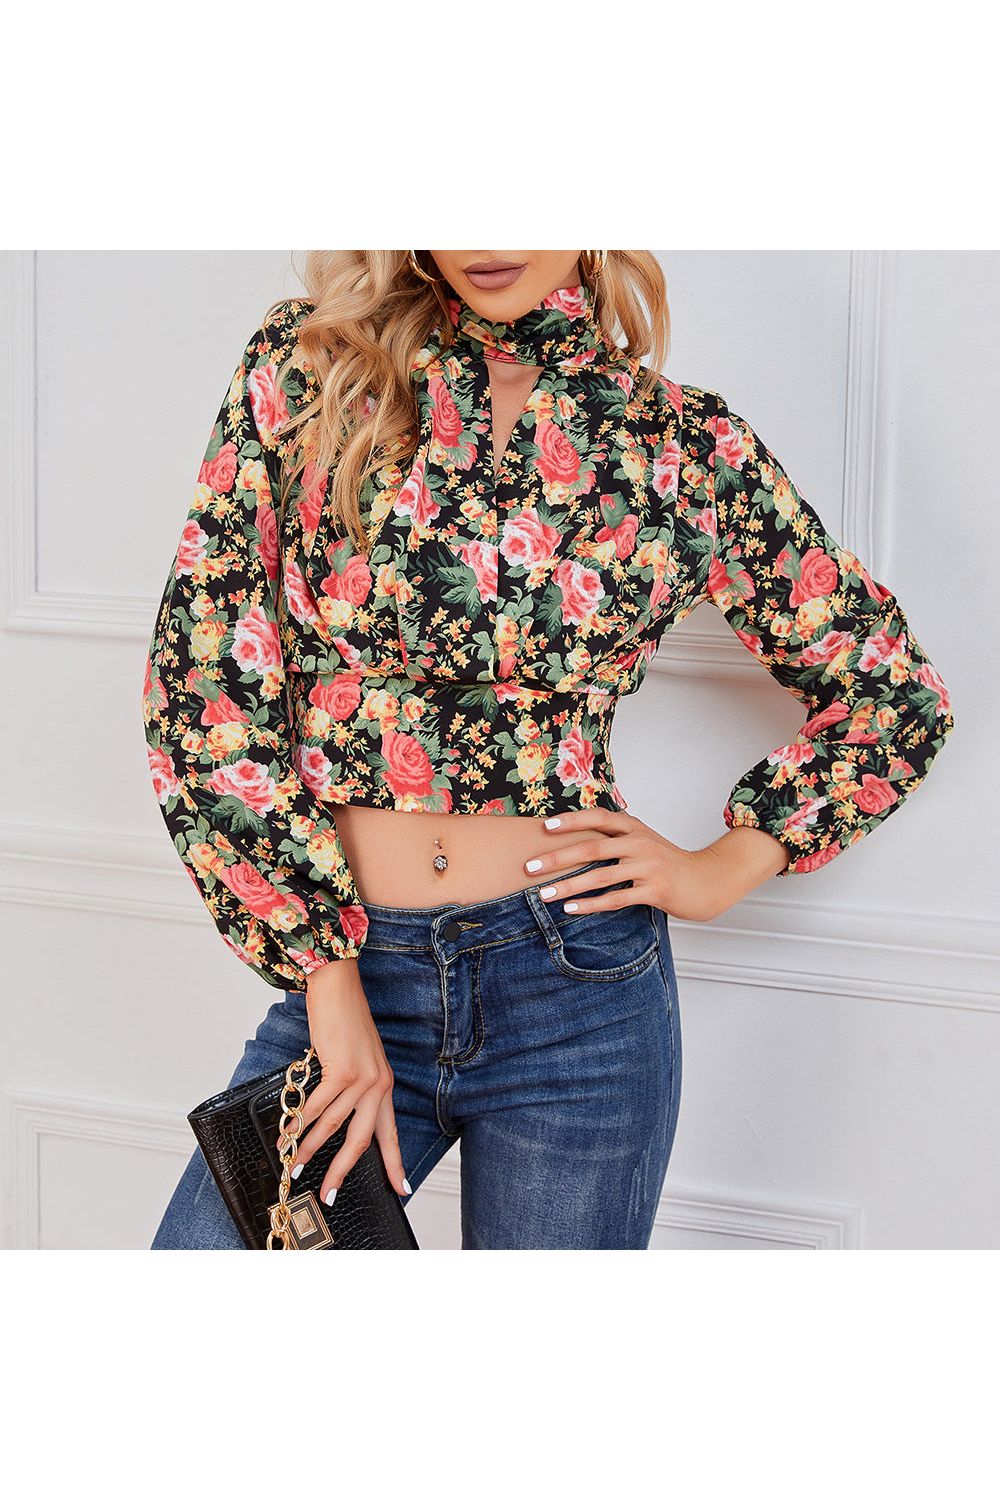 Cropped Floral Print Smocked Waist Blouse - By Baano